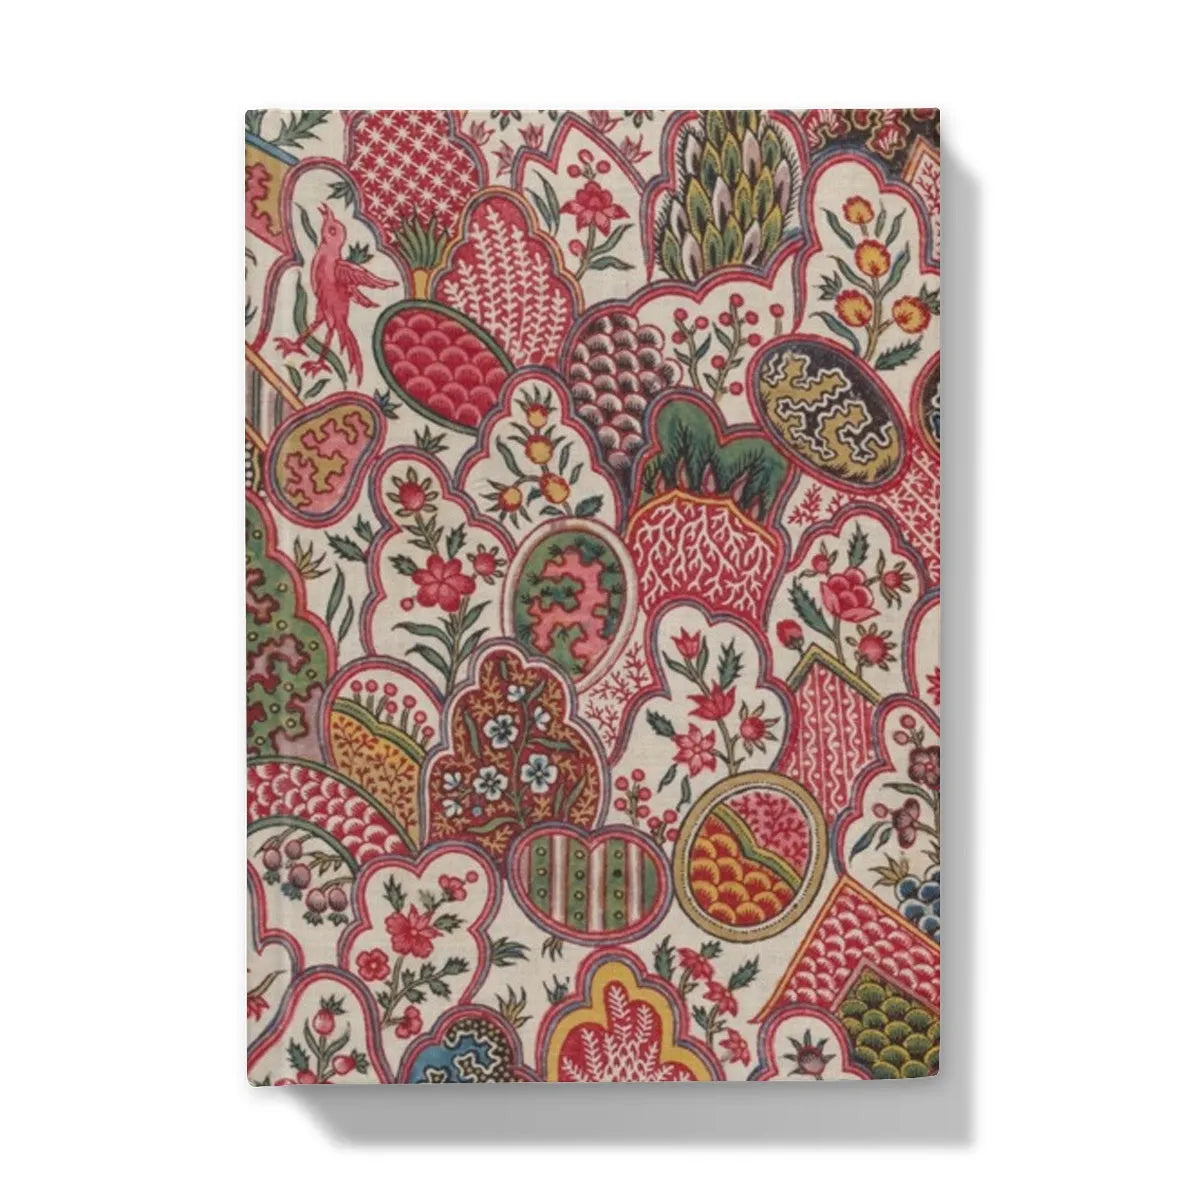 Vintage Floral Pattern Fabric Hardback Journal - 5’x7’ / Lined - Notebooks & Notepads - Aesthetic Art